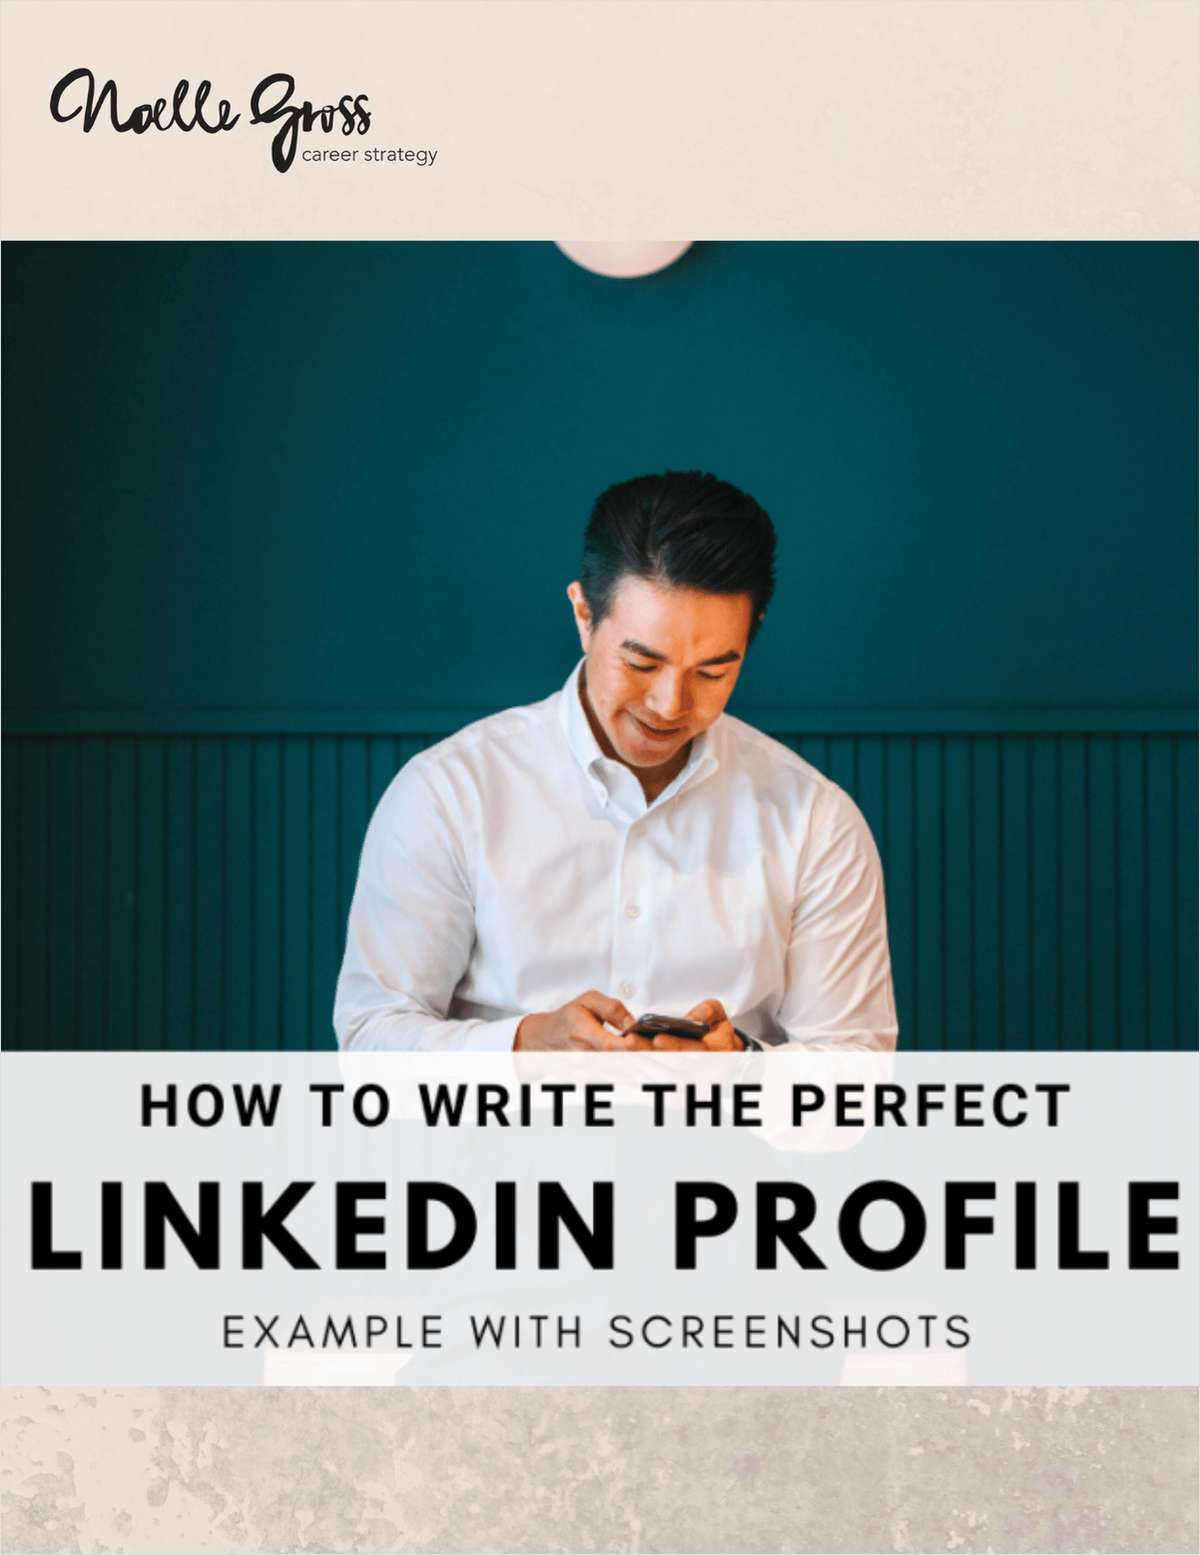 How To Write the Perfect LinkedIn Profile